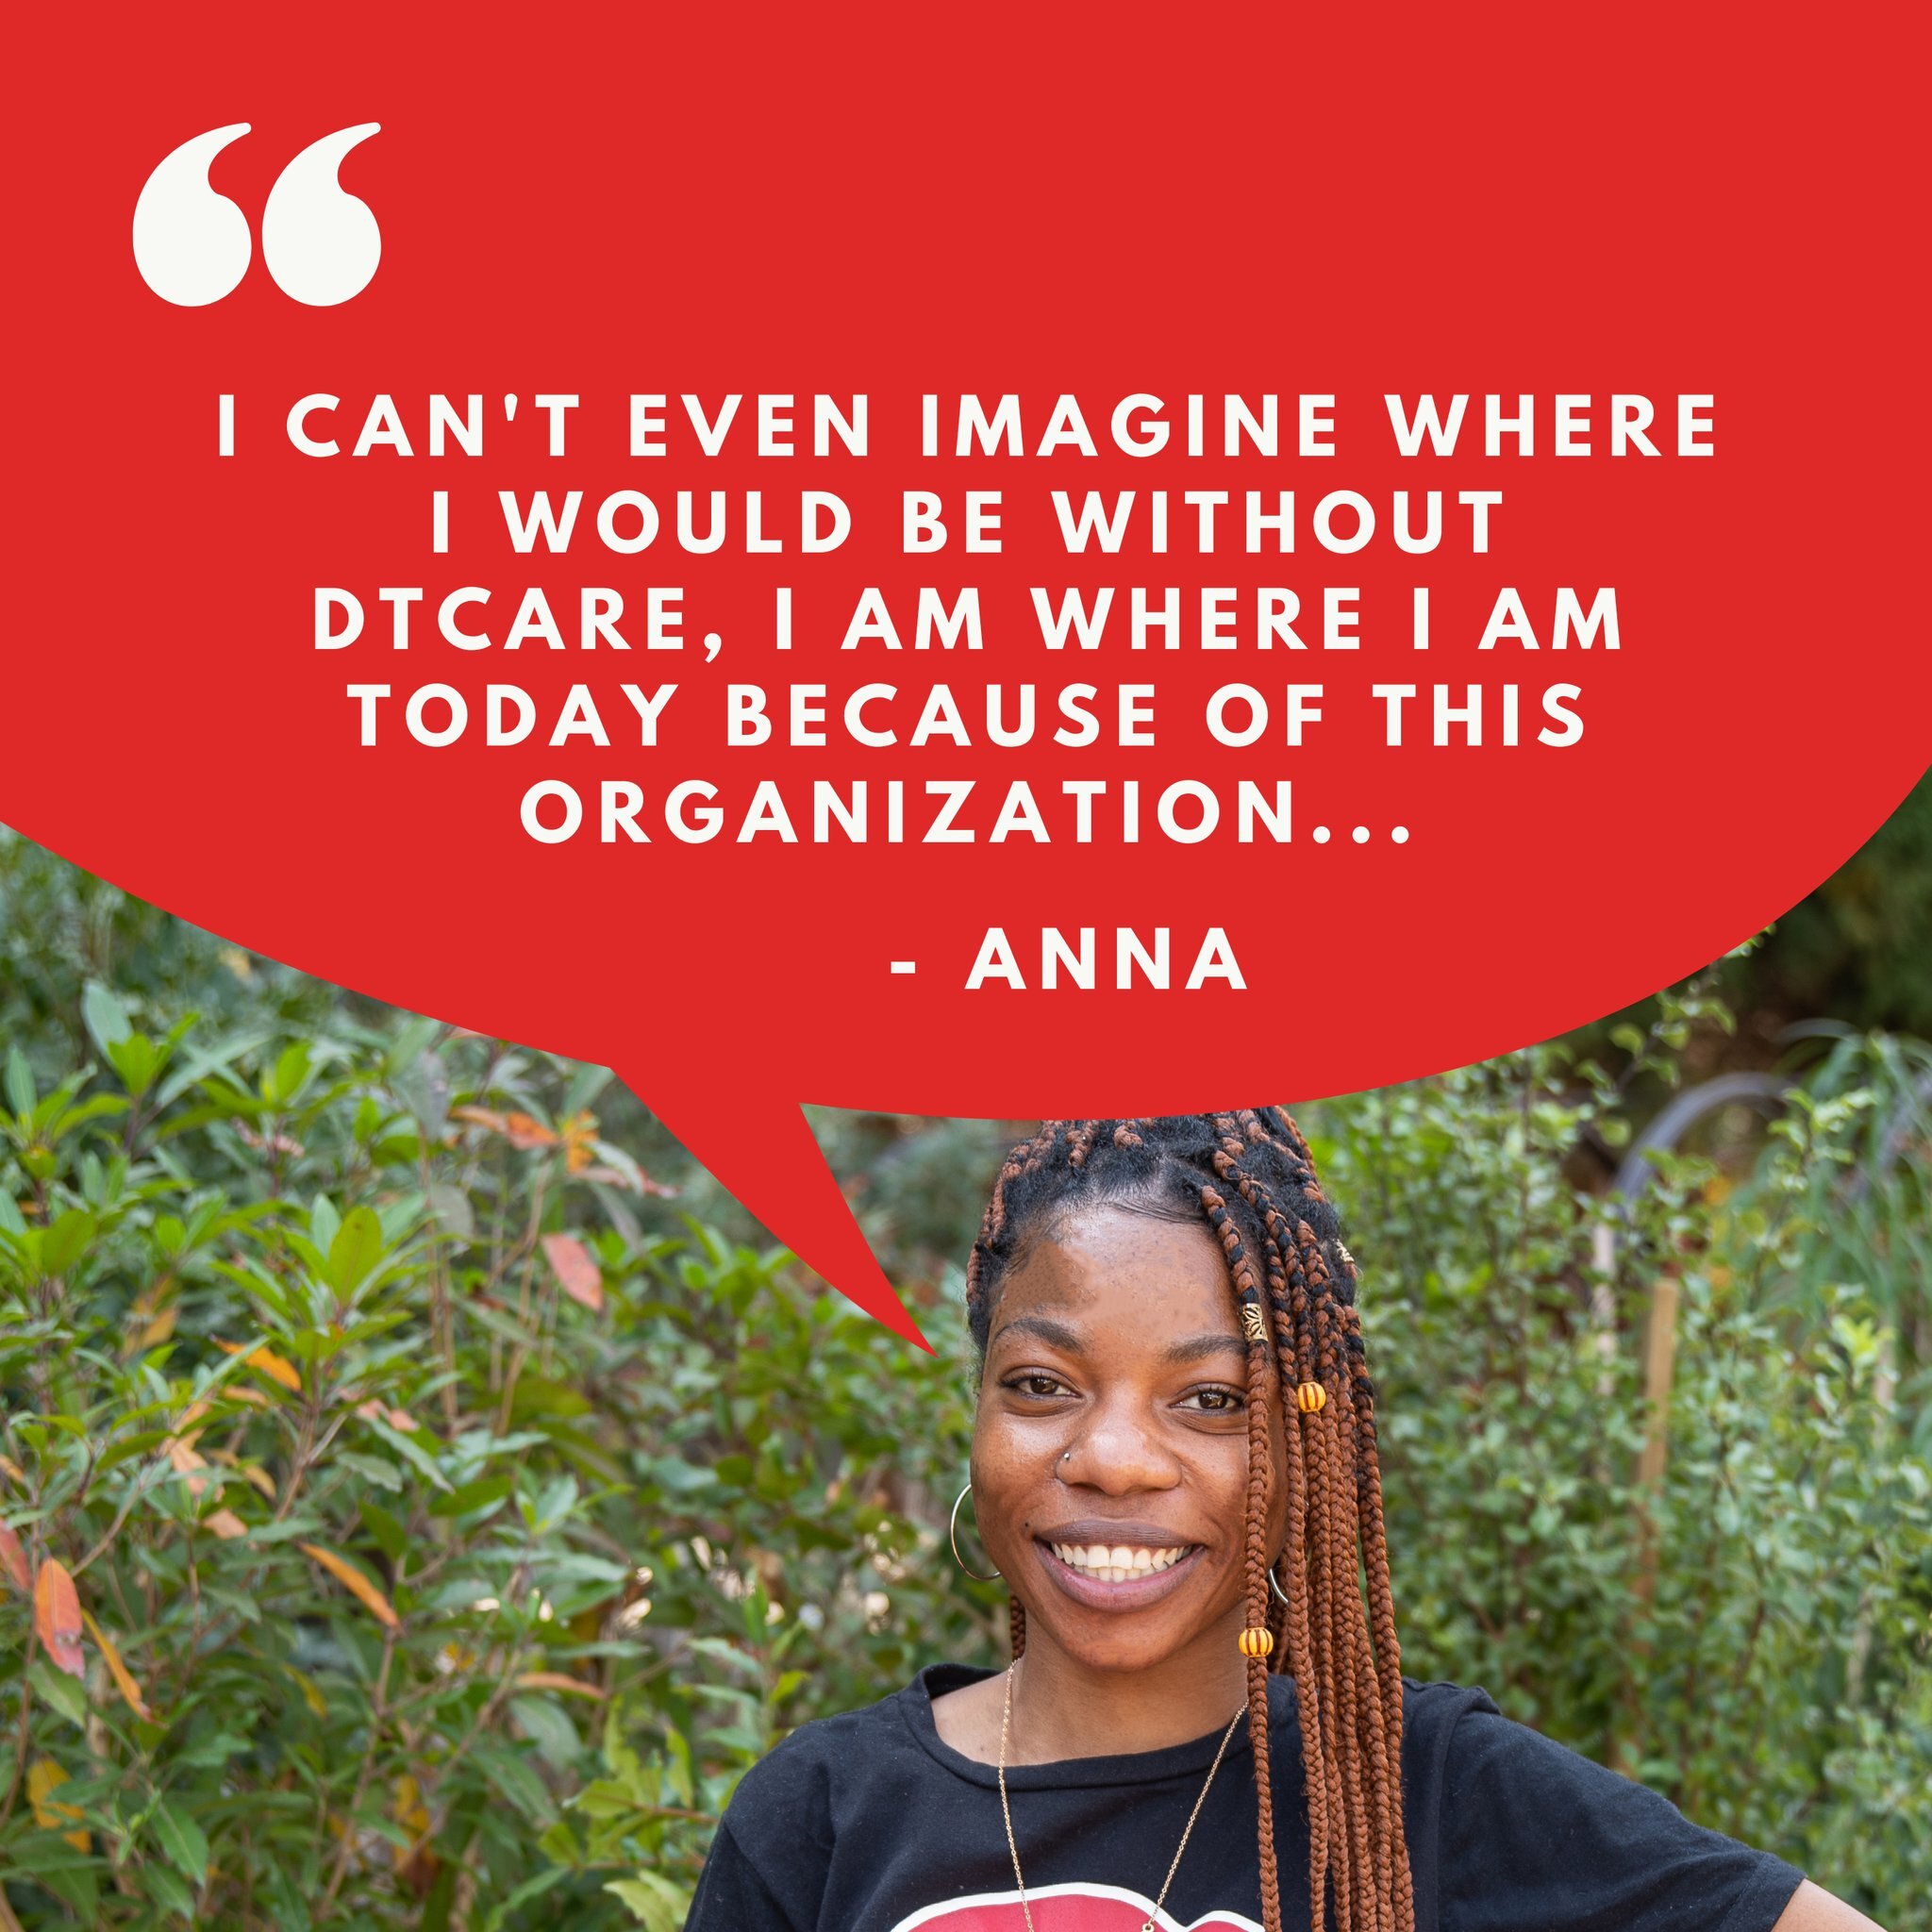 &quot;I can't even imagine where I'd be without DTCare.&quot; &ndash; Anna

DTCare empowers the next generation in Africa to pursue their dreams through education sponsorship and skills training. Anna's success story is a testament to the impact of t